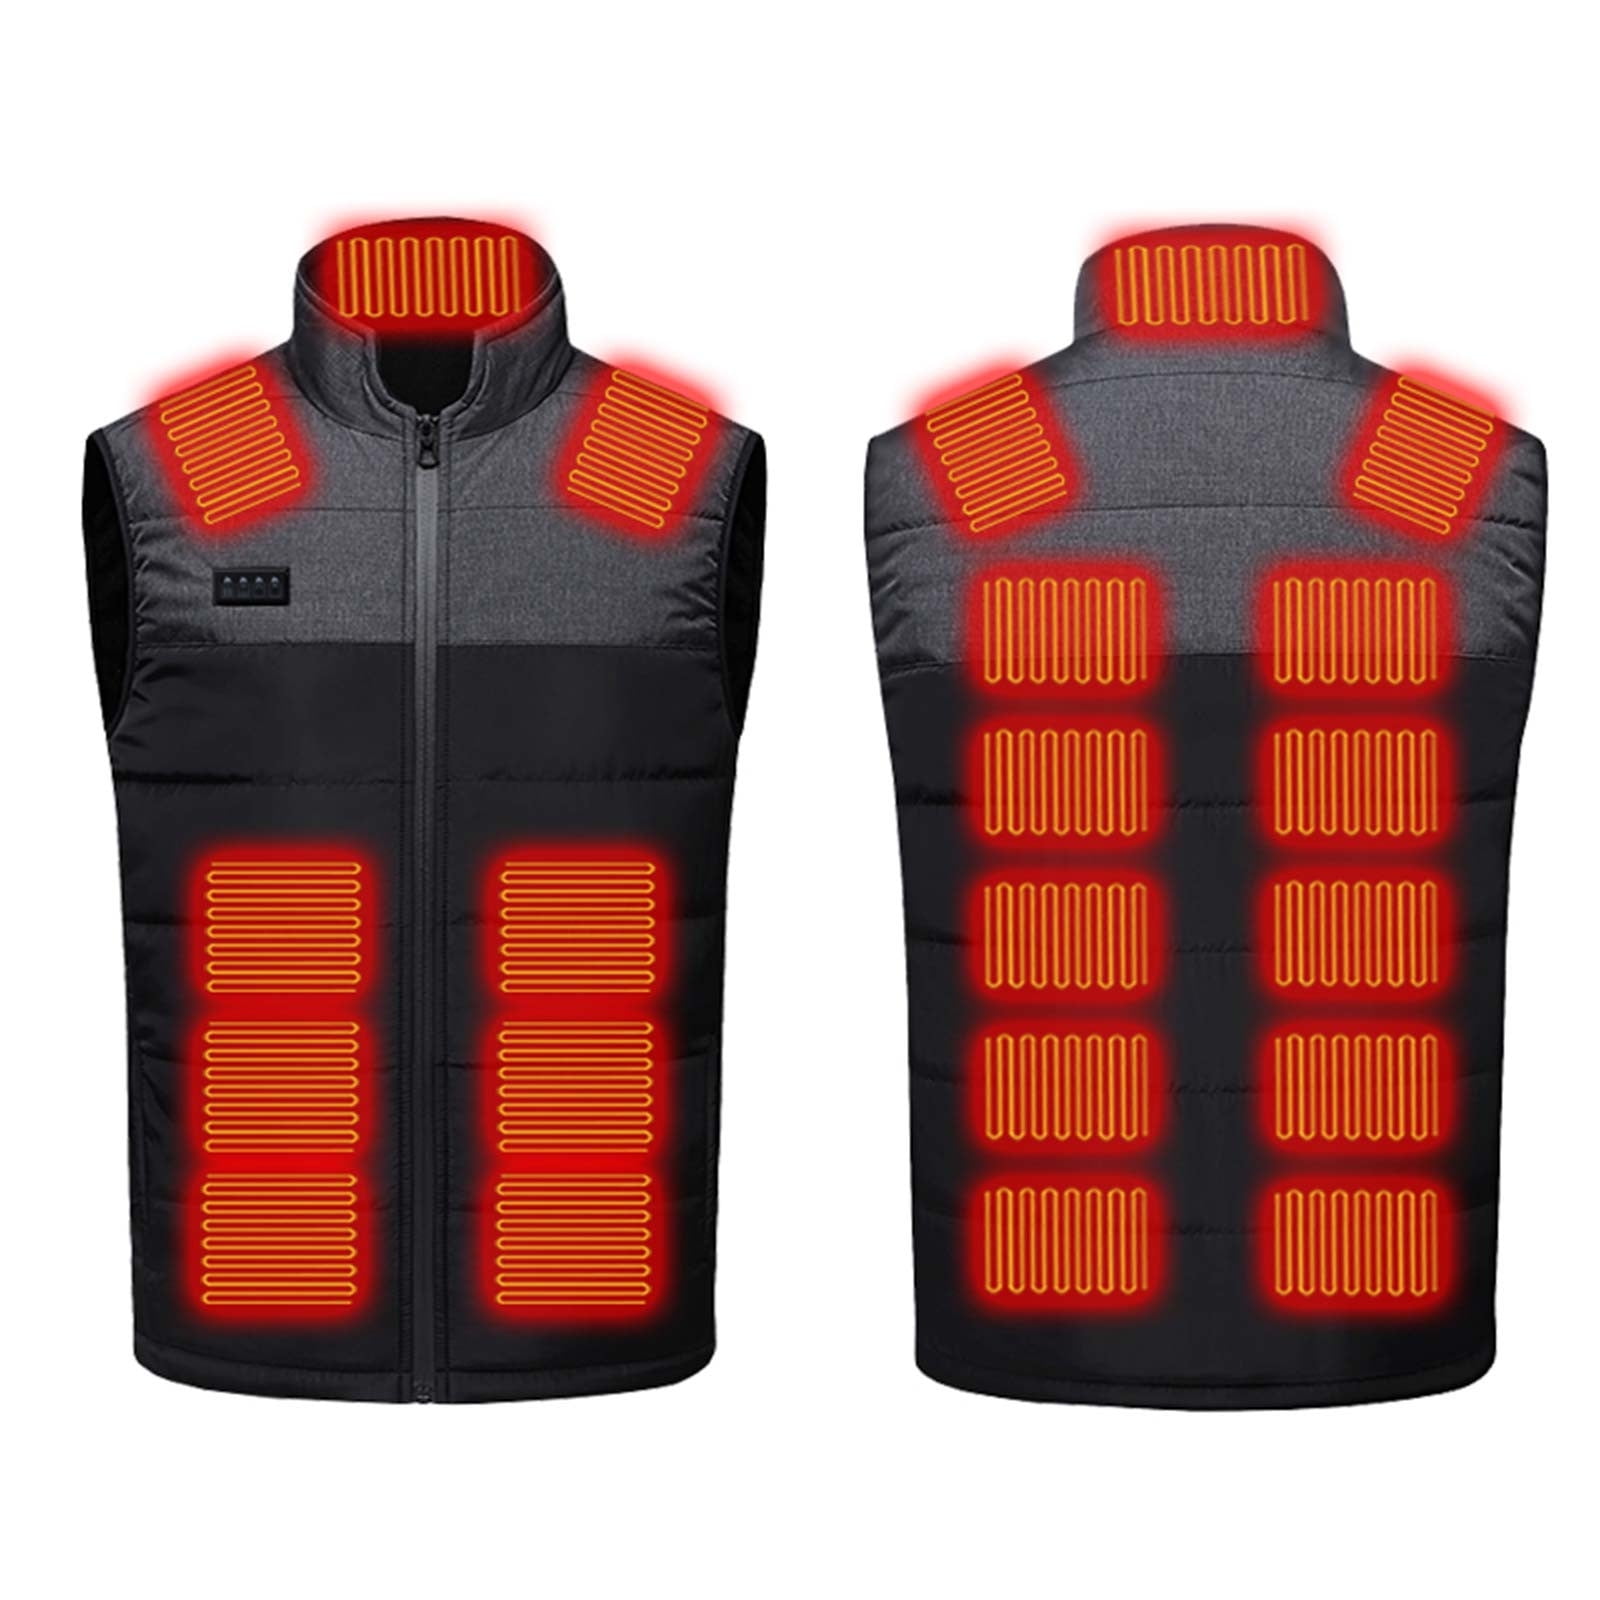 Women's Heating Vest with 21 Zones of Heat on Sale,Plus Size Heated ...